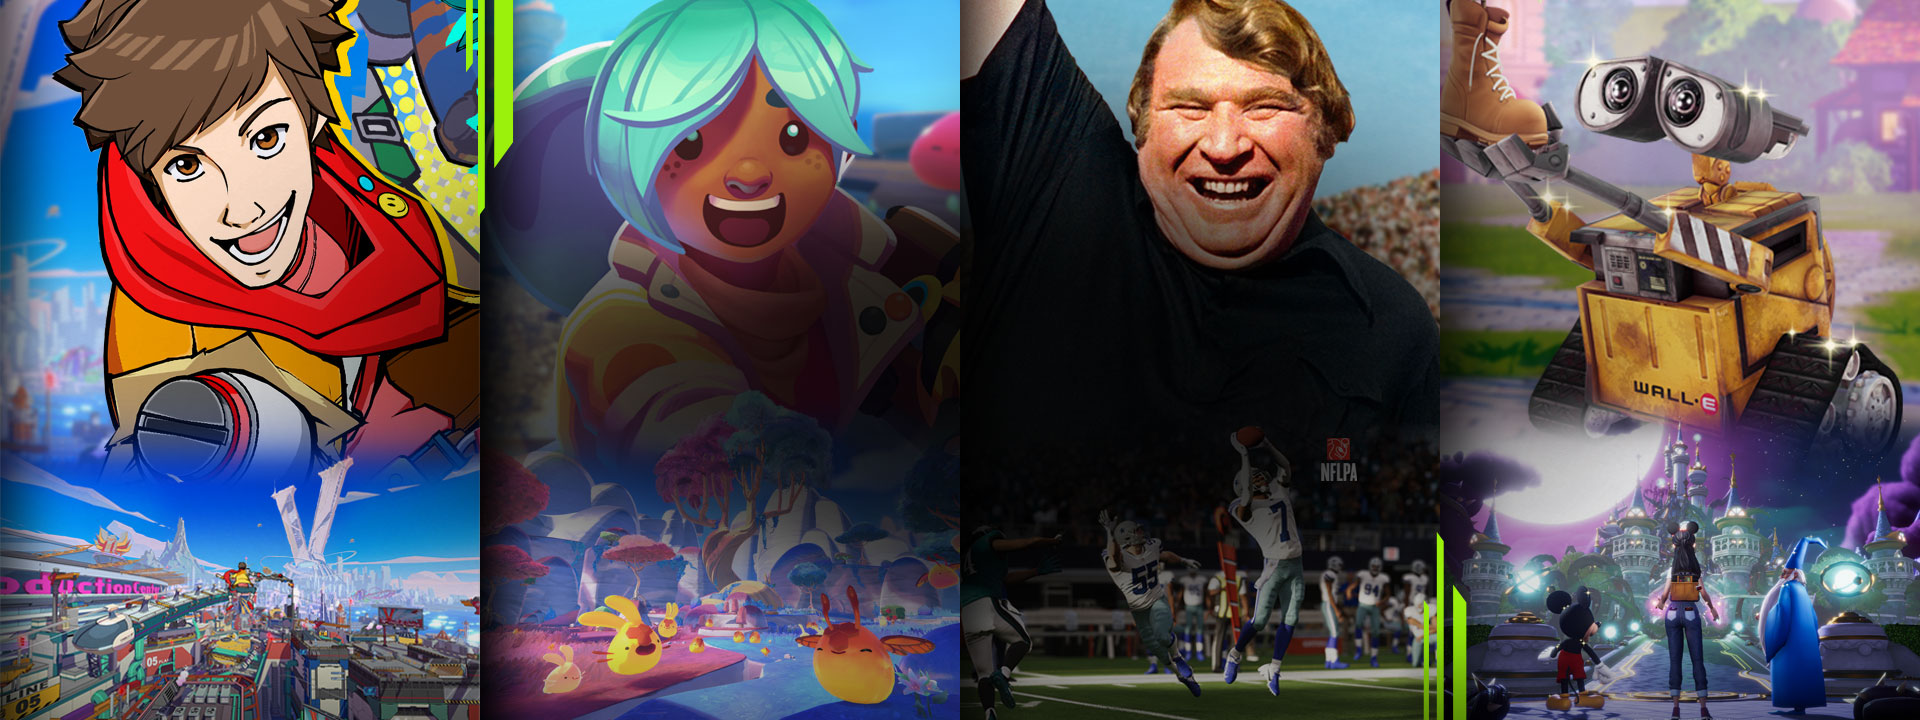 A selection of games available with Xbox Game Pass including Hi-Fi RUSH, Slime Rancher 2, Madden NFL 23, and Disney Dreamlight Valley.